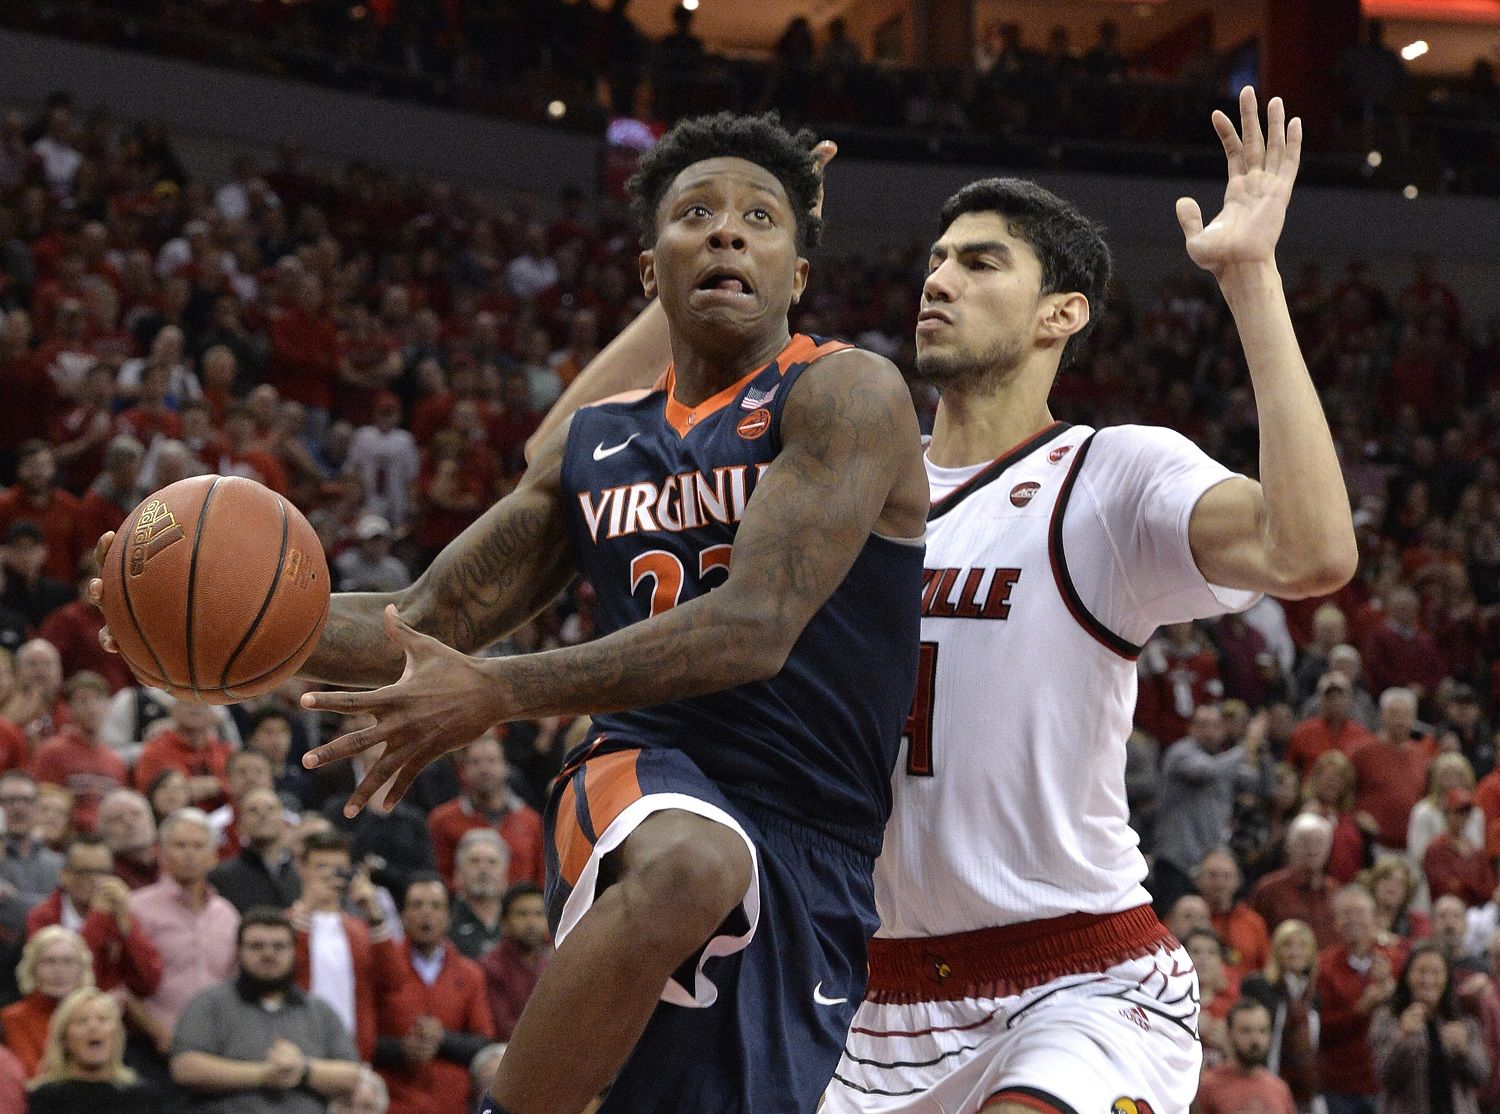 Virginia guard Nigel Johnson (23) goes in for a layup past the defense of Louisville forward Anas Mahmoud (14) during the first half of an NCAA college basketball game, Thursday, March 1, 2018, in Louisville, Ky. (AP Photo/Timothy D. Easley)